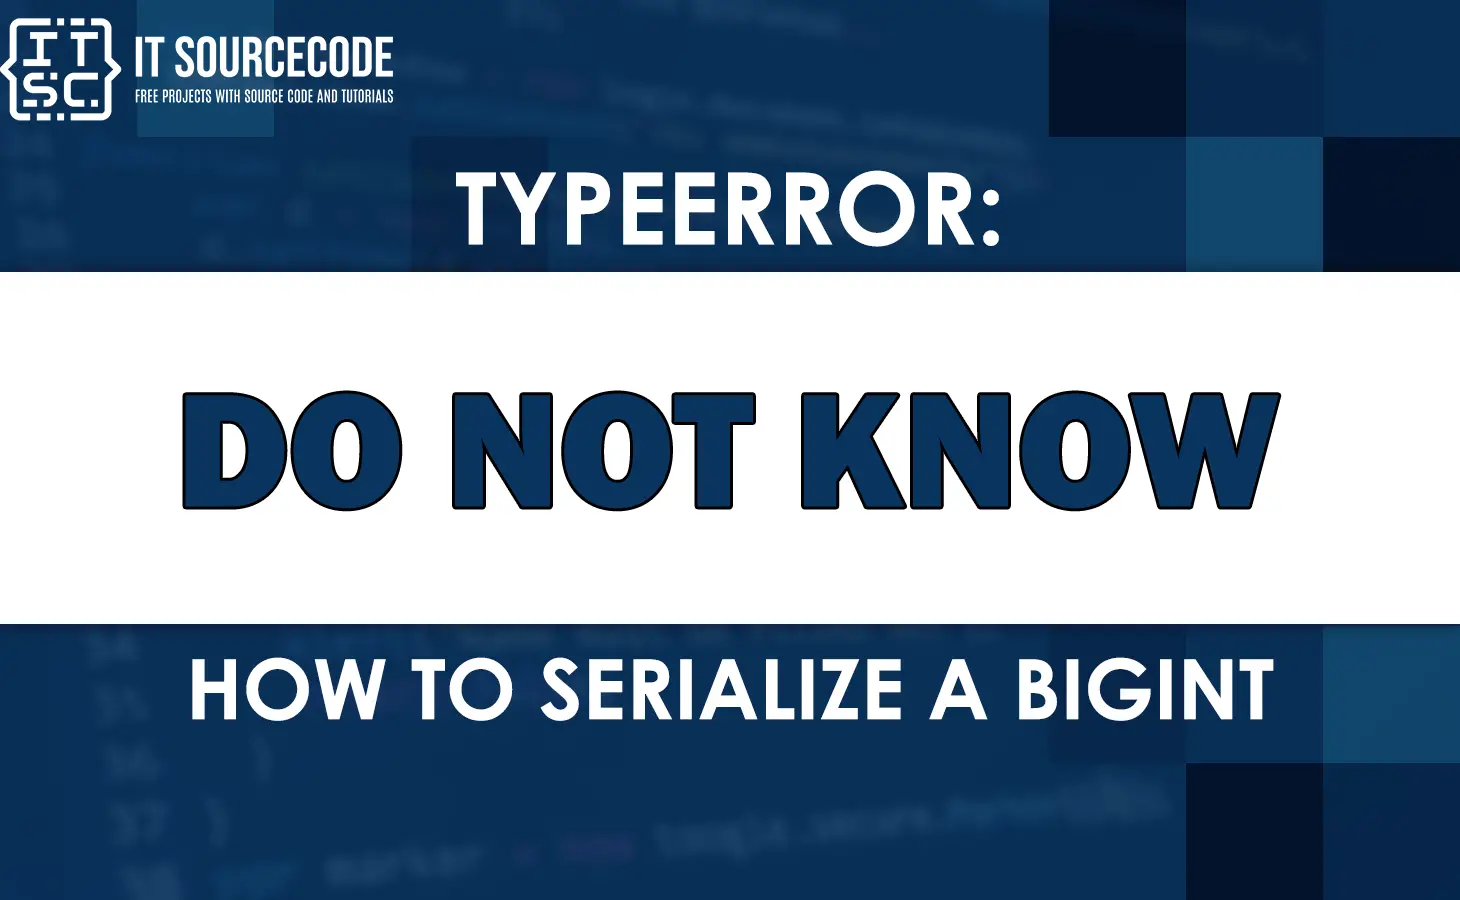 Typeerror: do not know how to serialize a bigint